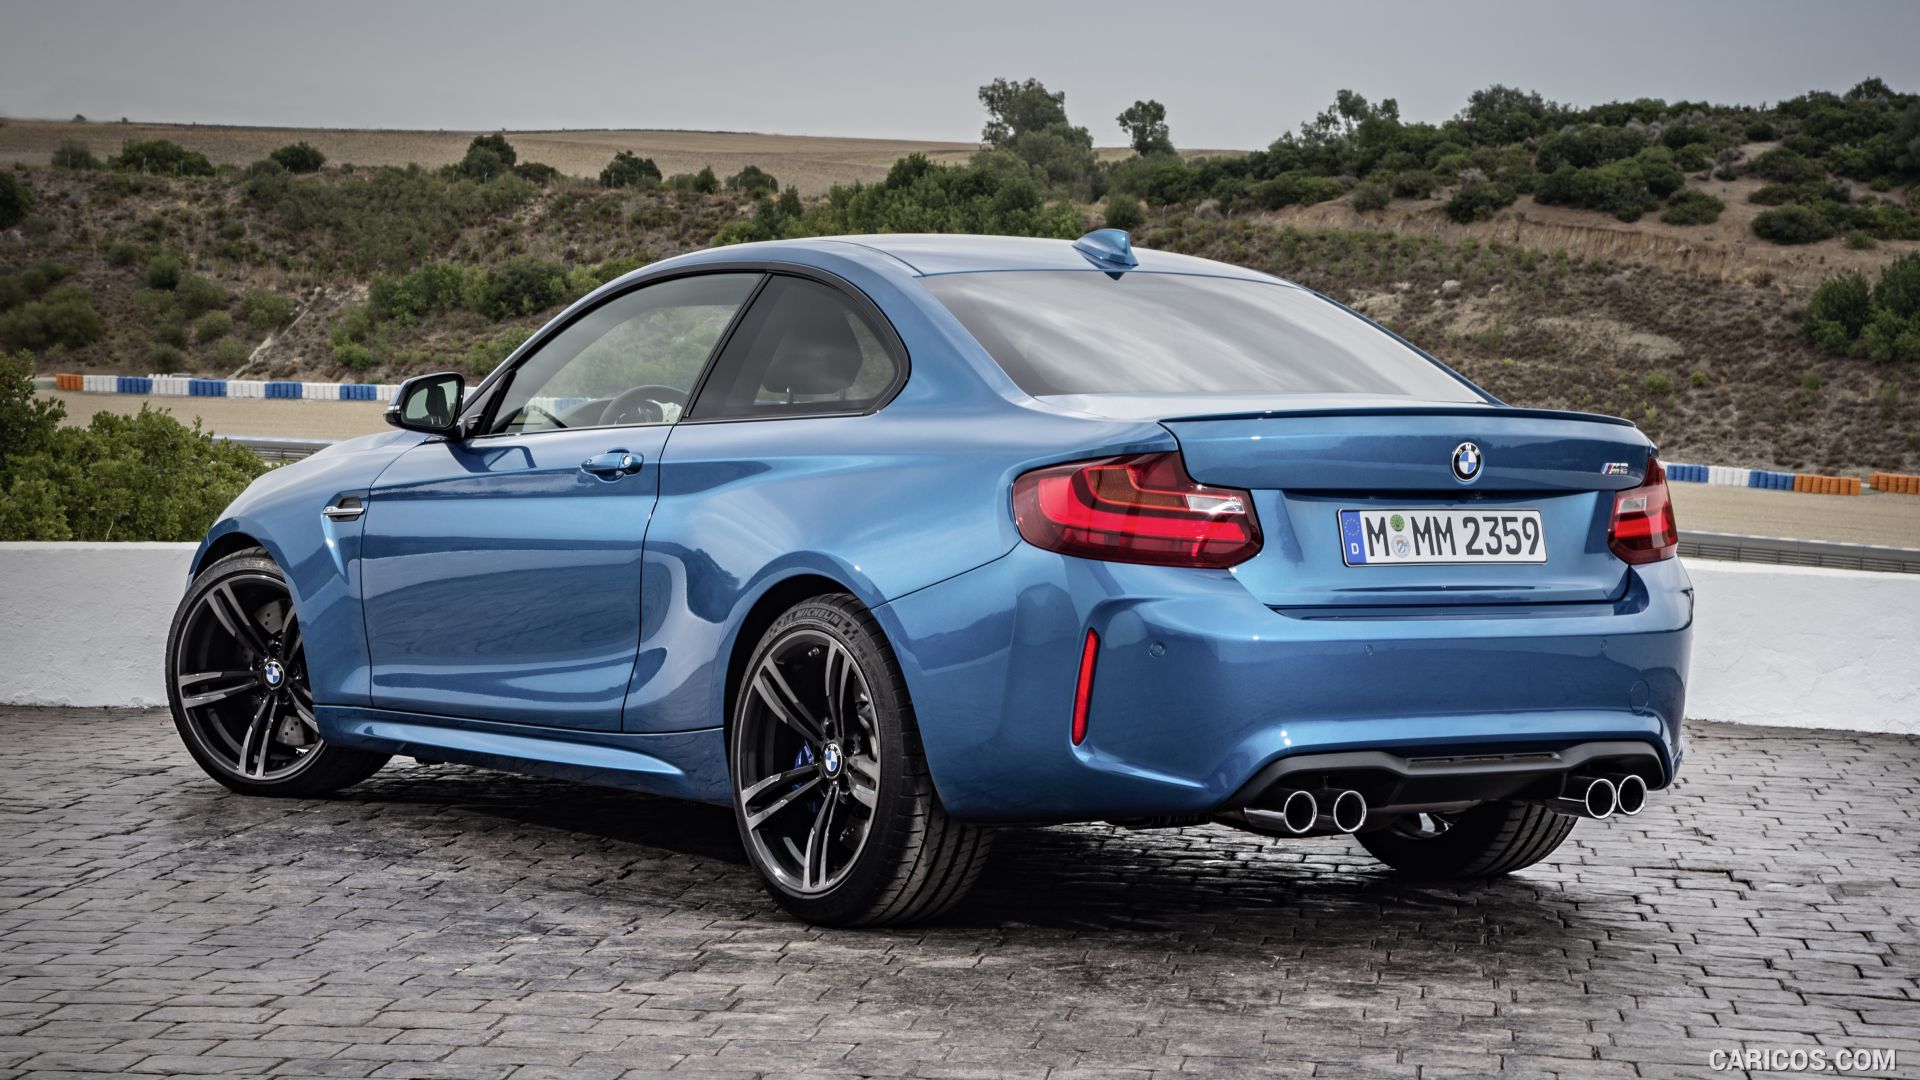 Gorgeous BMW M2 Wallpaper Full HD Pictures